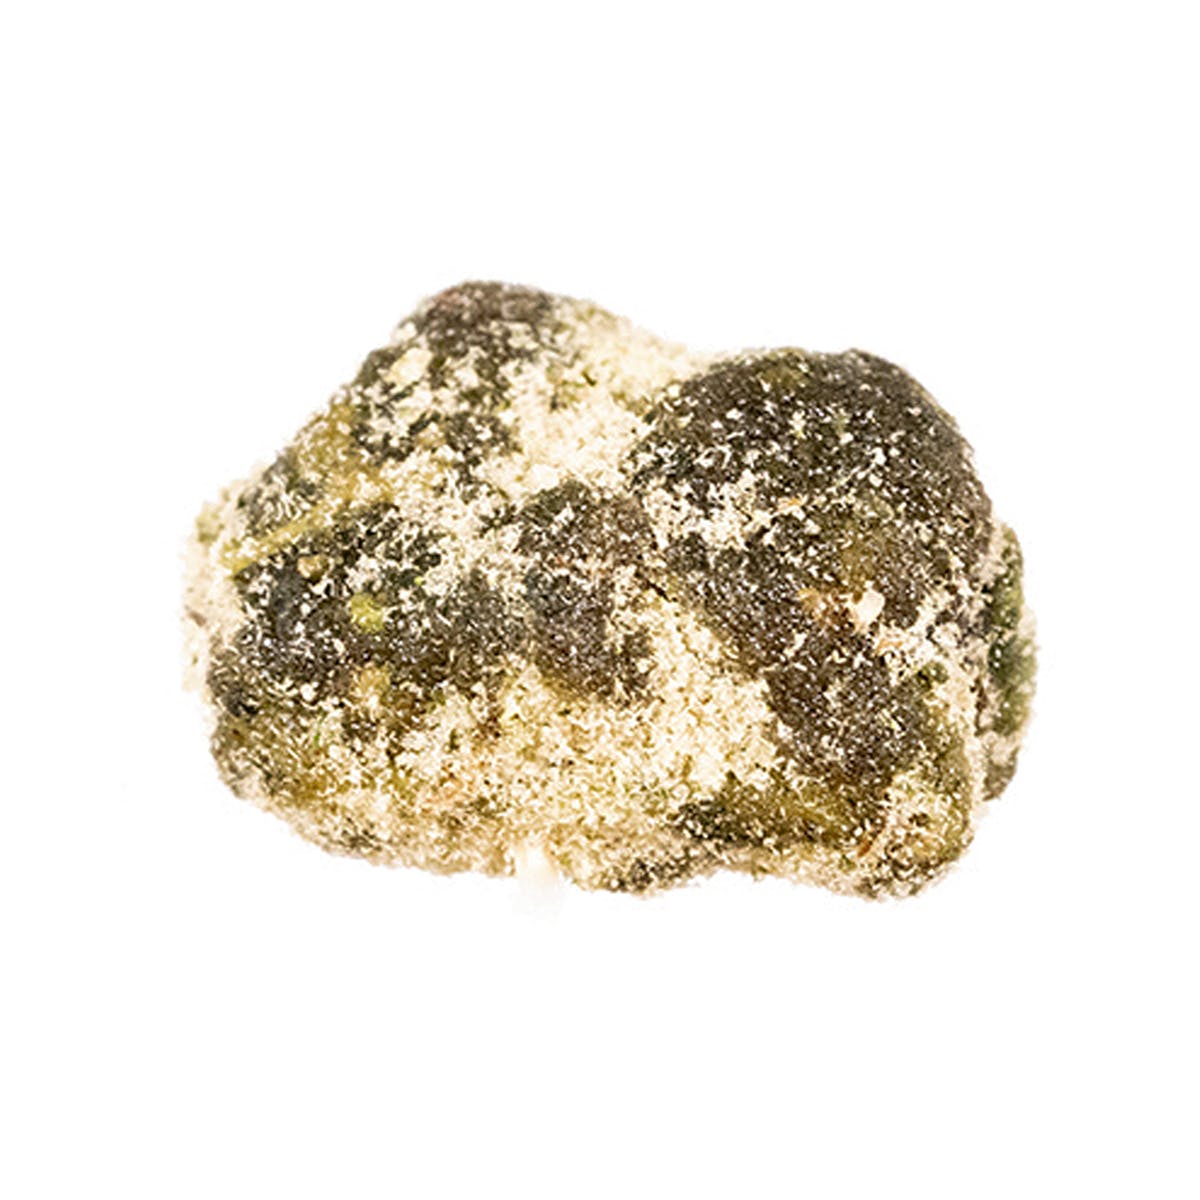 concentrate-puraearth-space-rock-5g